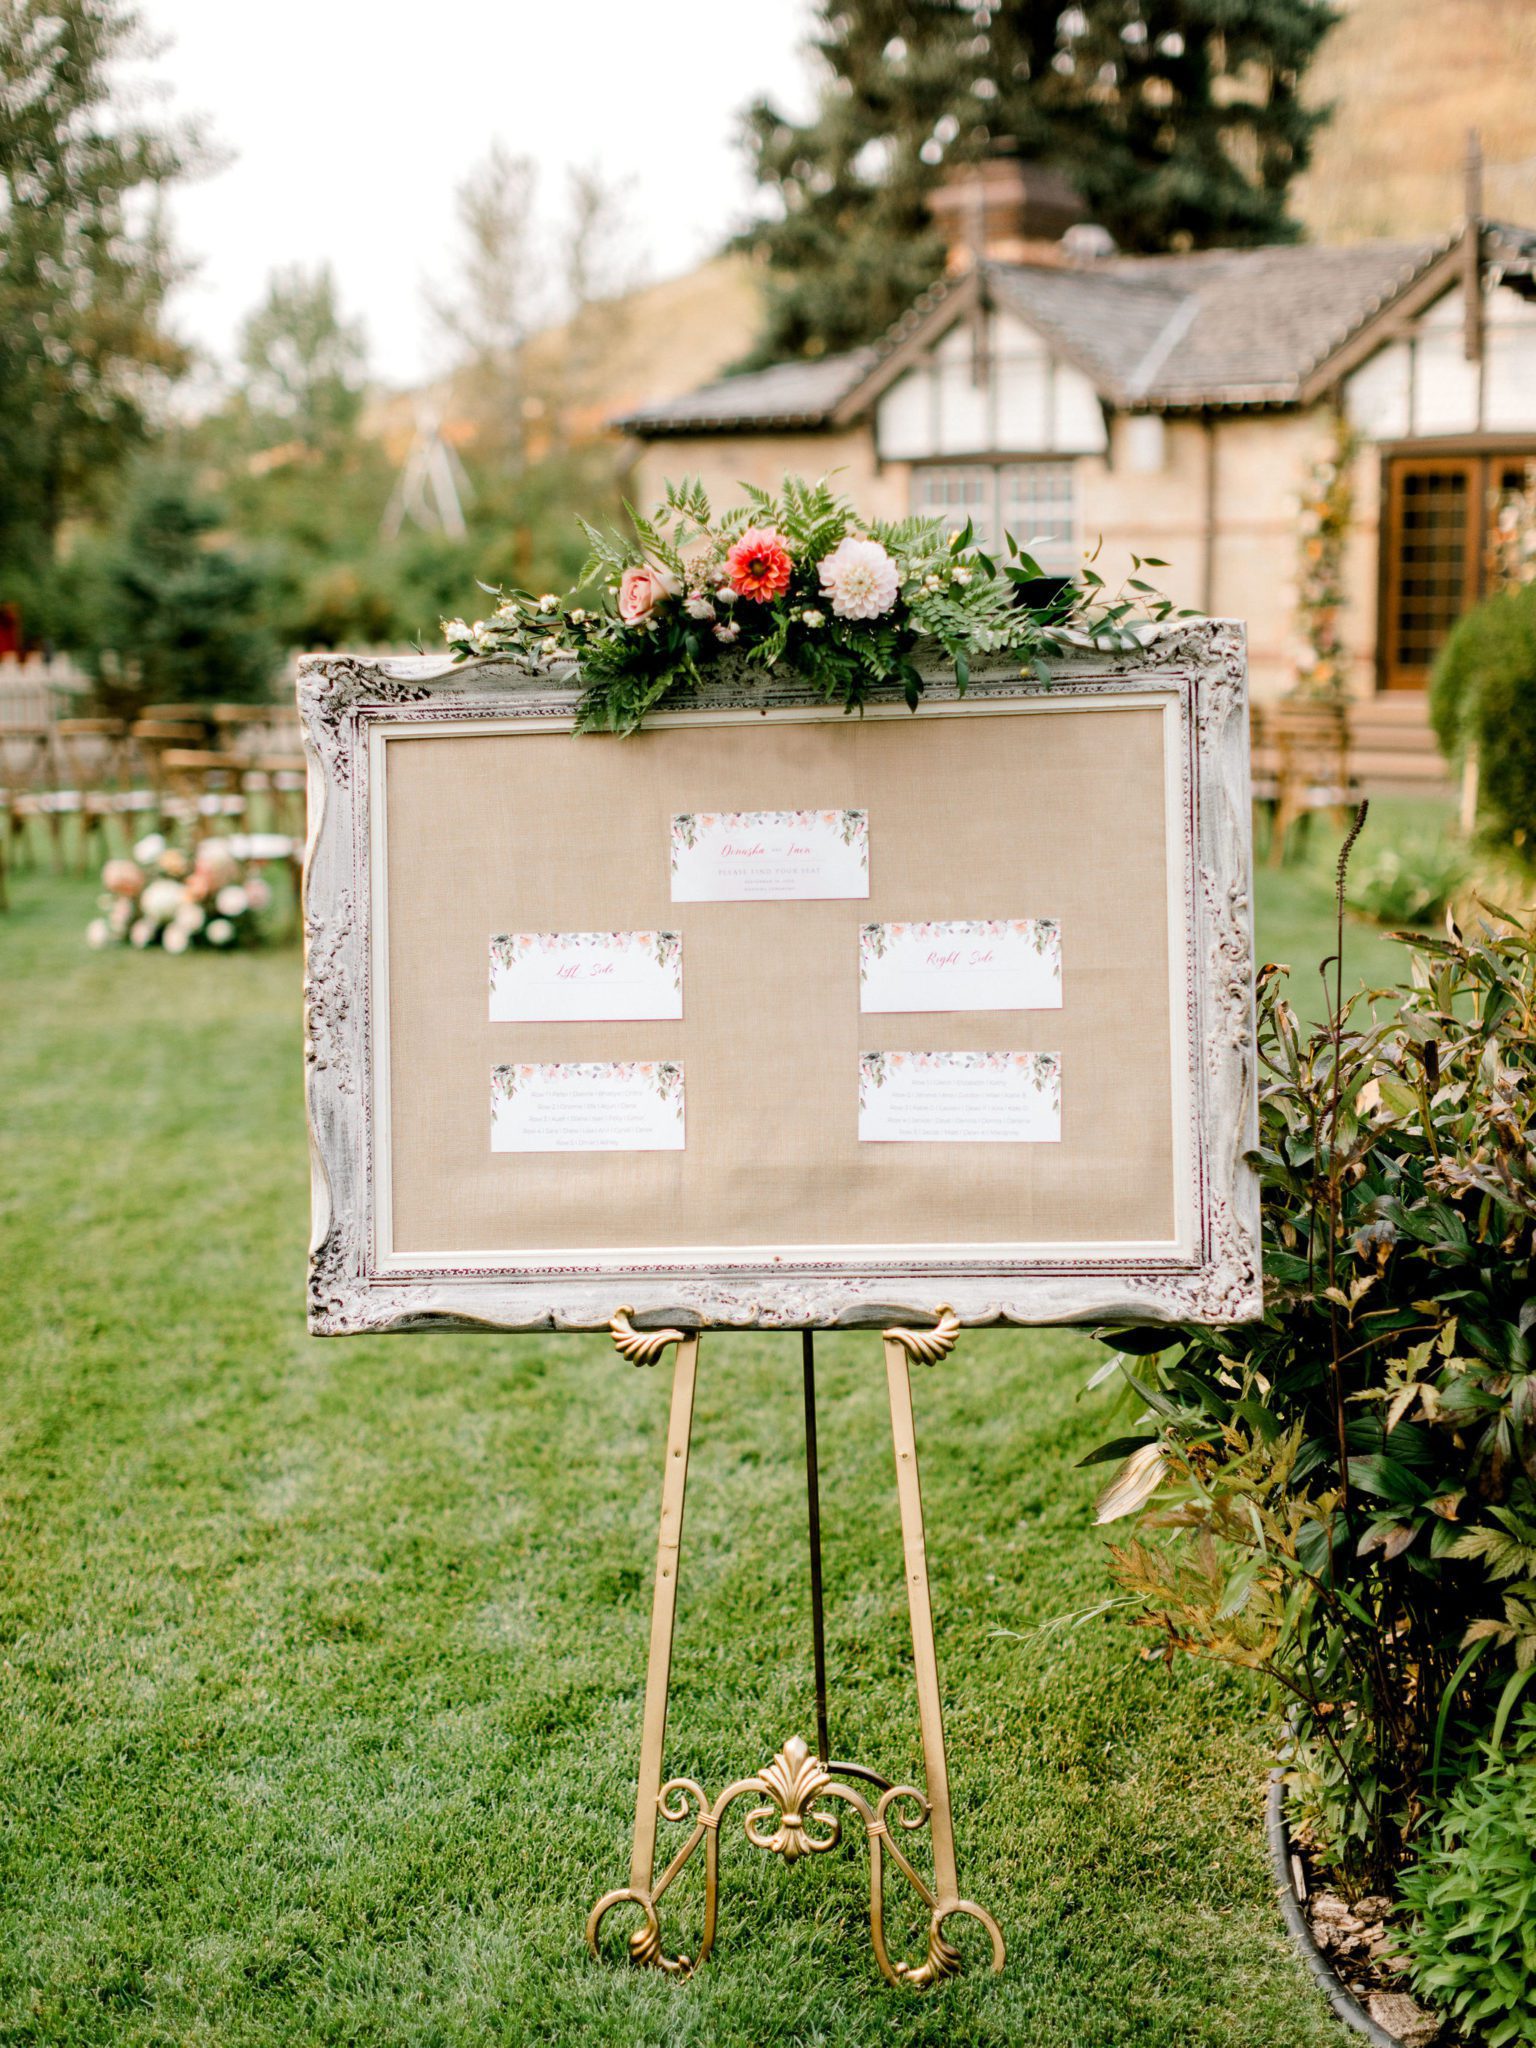 Romantic seating chart with floral details for an outdoor summer wedding ceremony